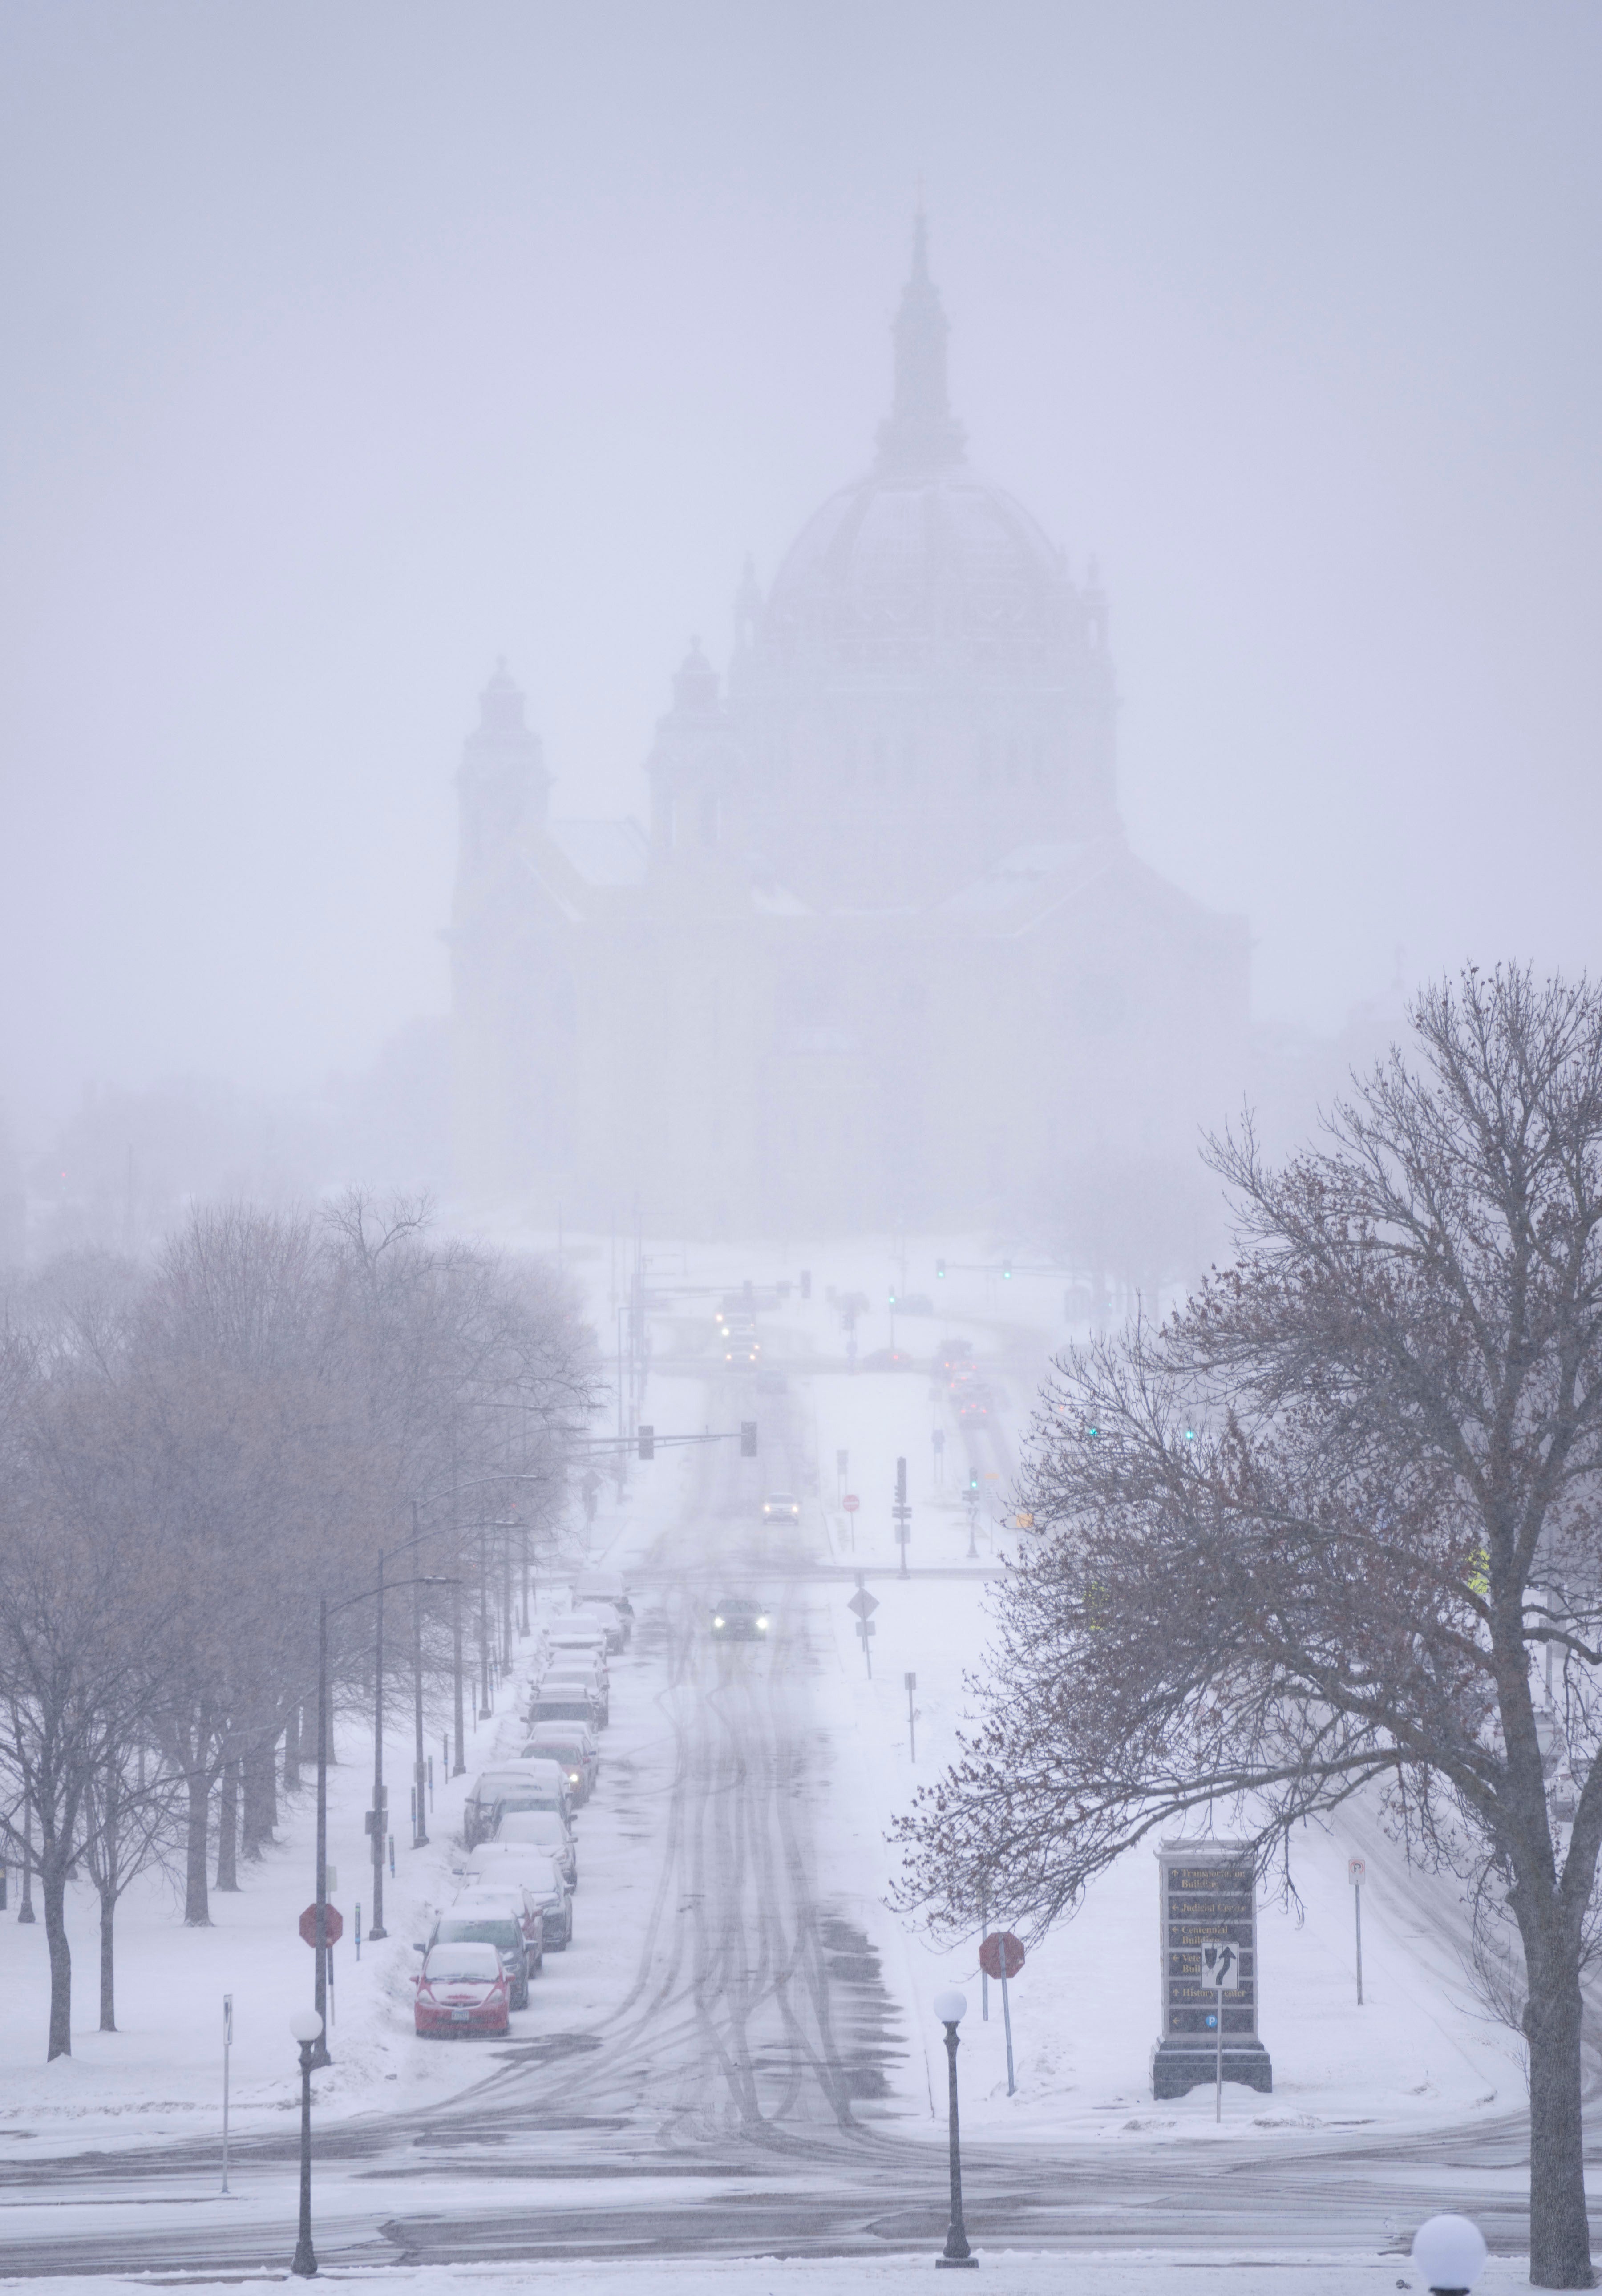 Snow begins to fall around the Cathedral of Saint Paul, on Tuesday, February 21 at the Minnesota State Capitol in St. Paul, Minnesota. A monster winter storm took aim at the Upper Midwest on Tuesday (Alex Kormann/Star Tribune via AP)